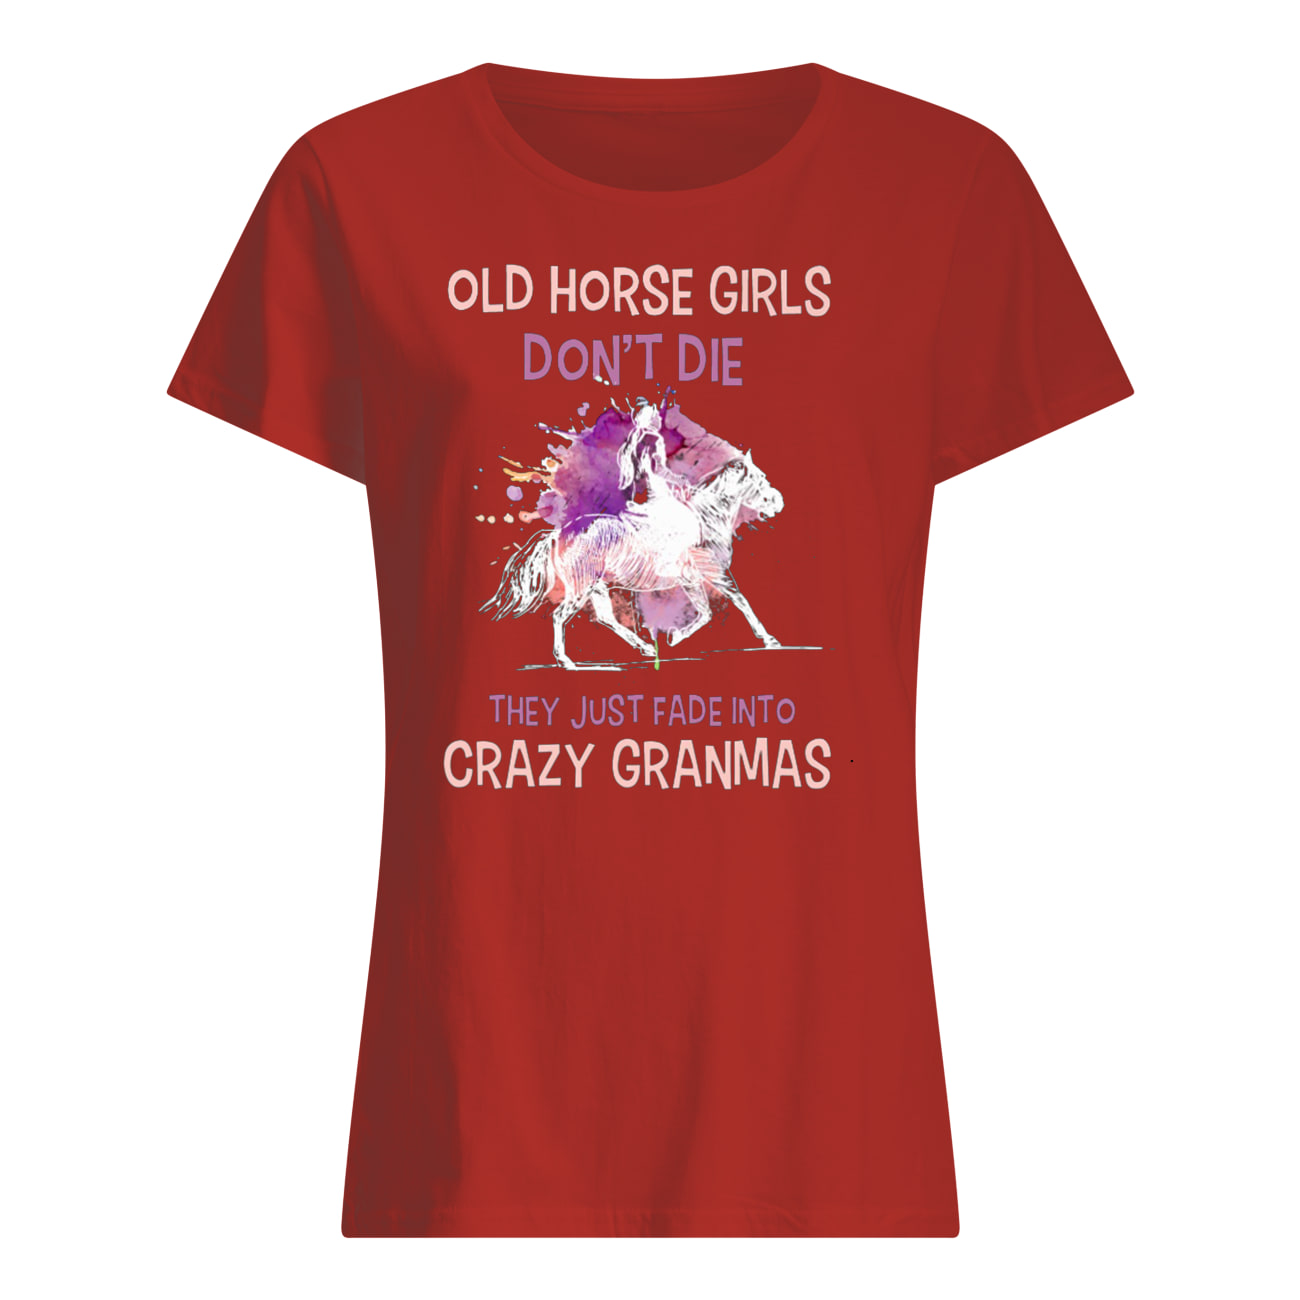 Old horse girls don't die they just fade into crazy granmas womens shirt